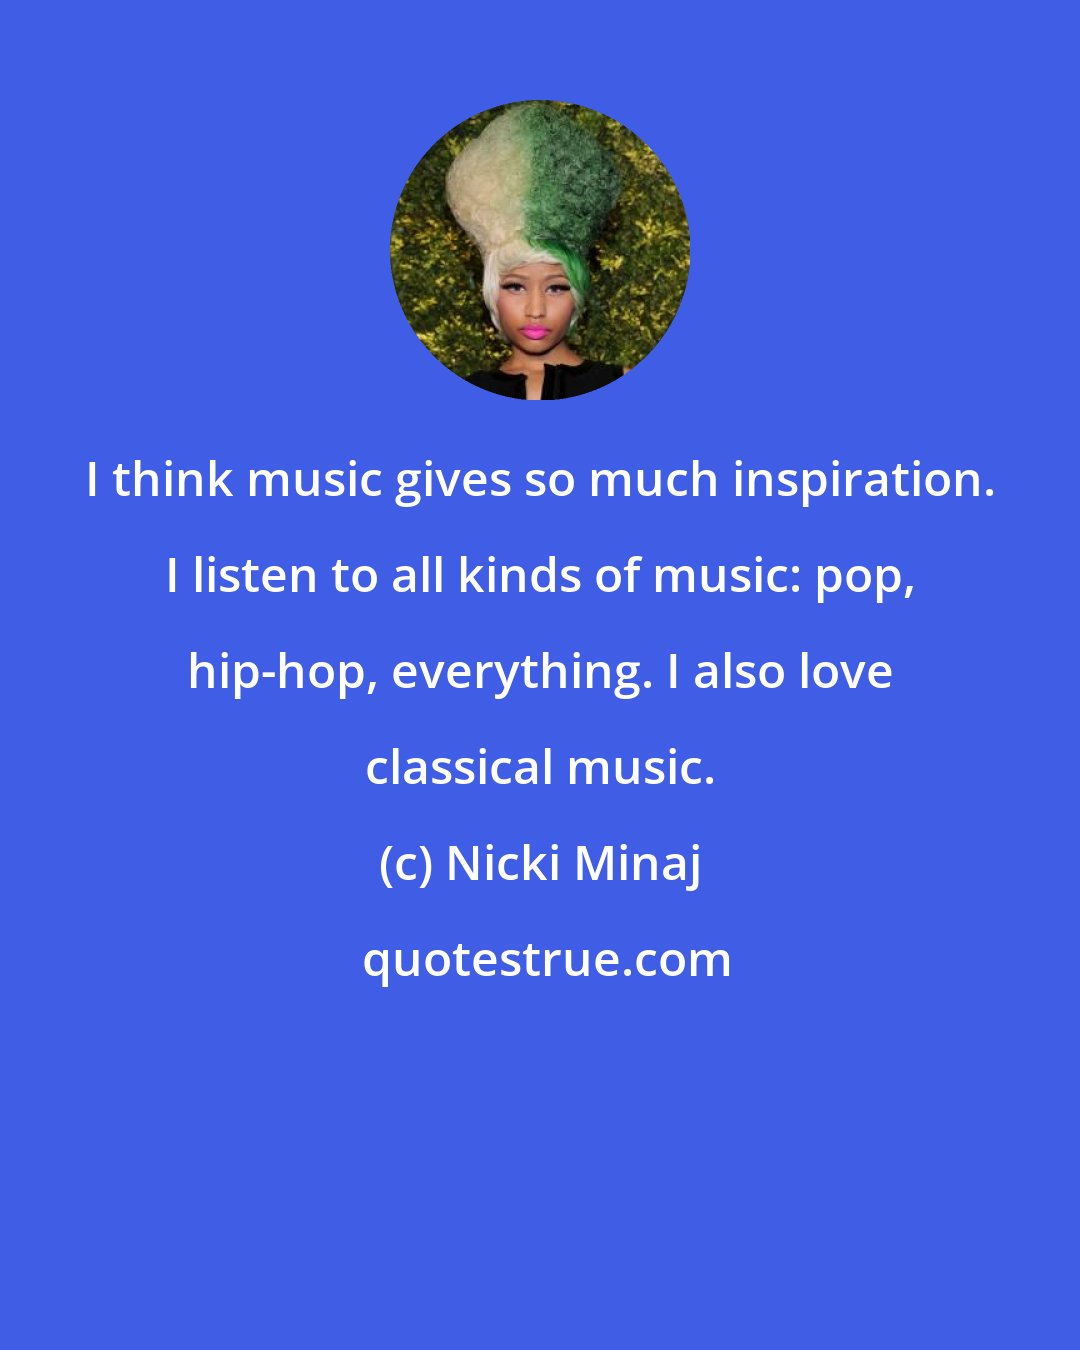 Nicki Minaj: I think music gives so much inspiration. I listen to all kinds of music: pop, hip-hop, everything. I also love classical music.